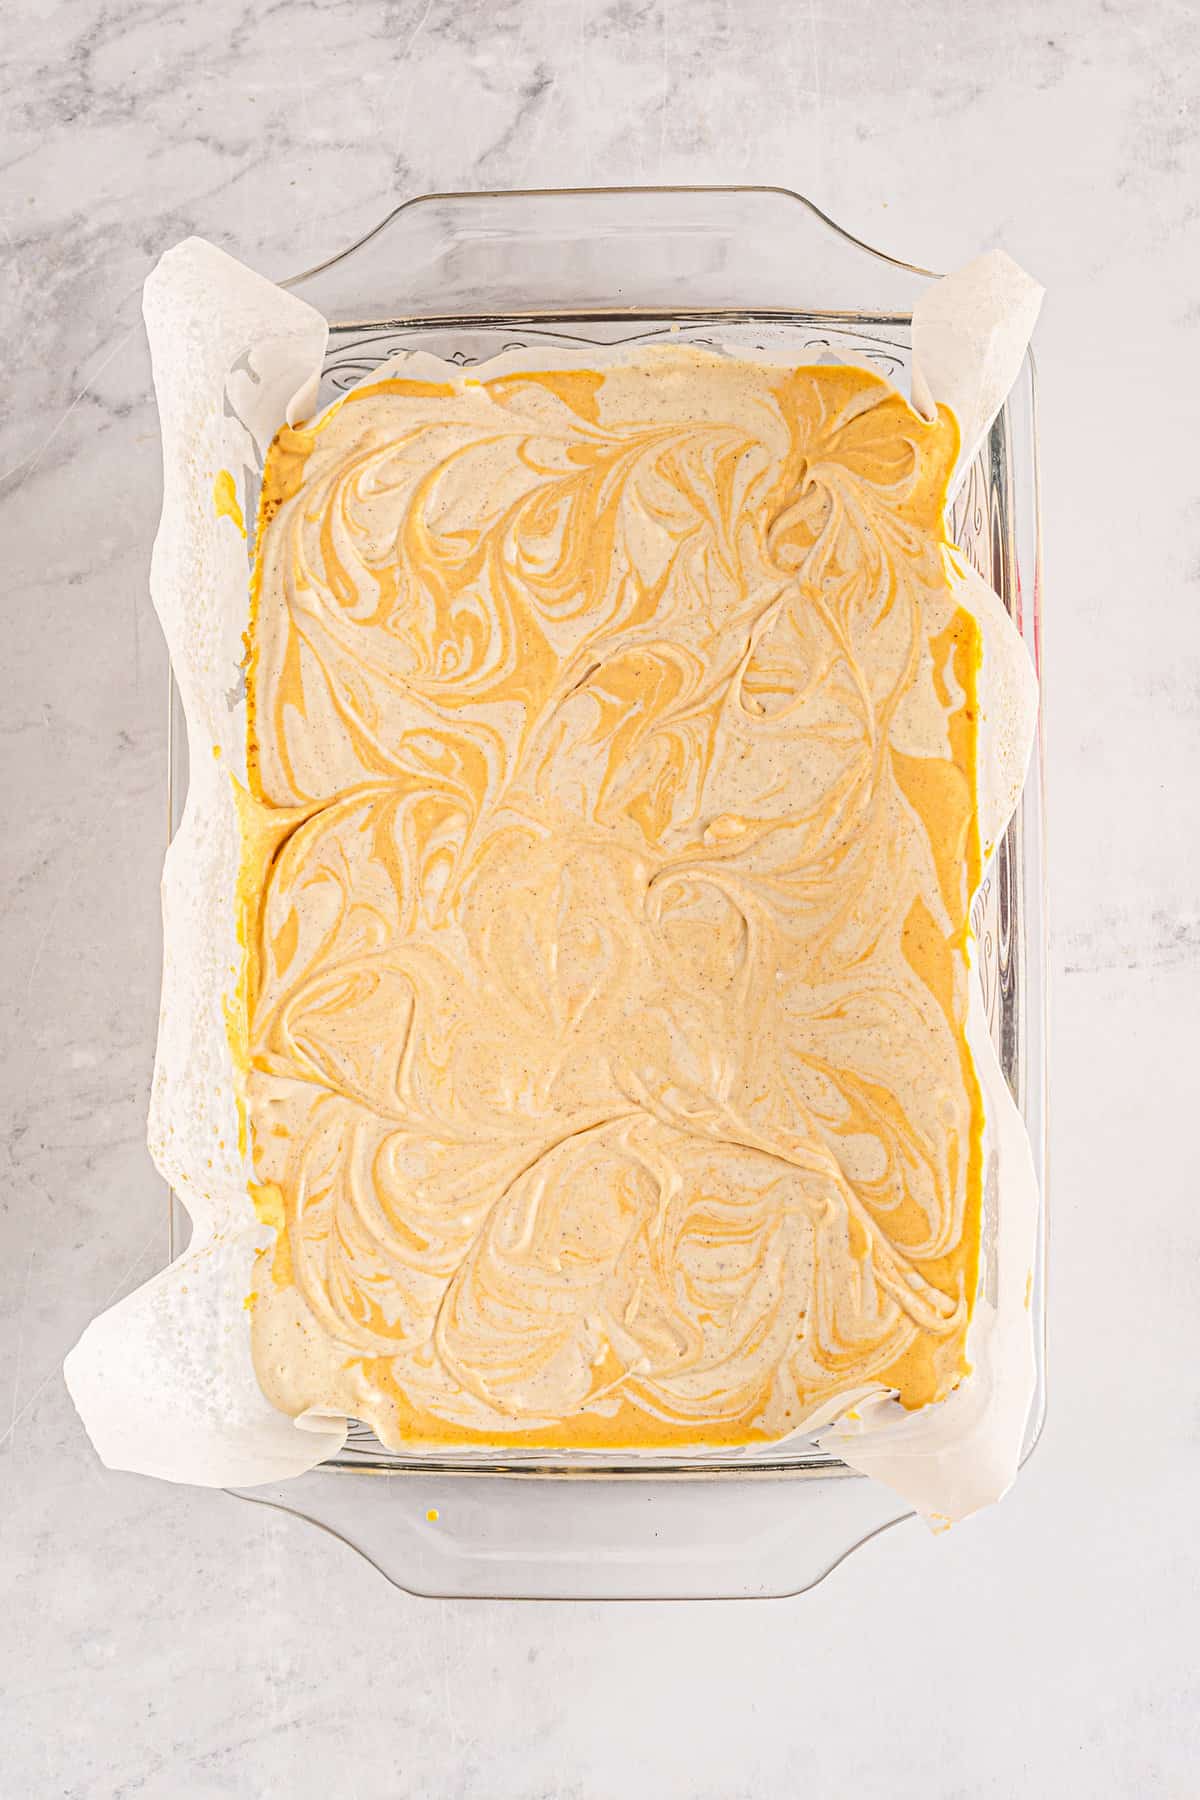 Baking dish with pumpkin pie cheesecake swirled together in it before baking